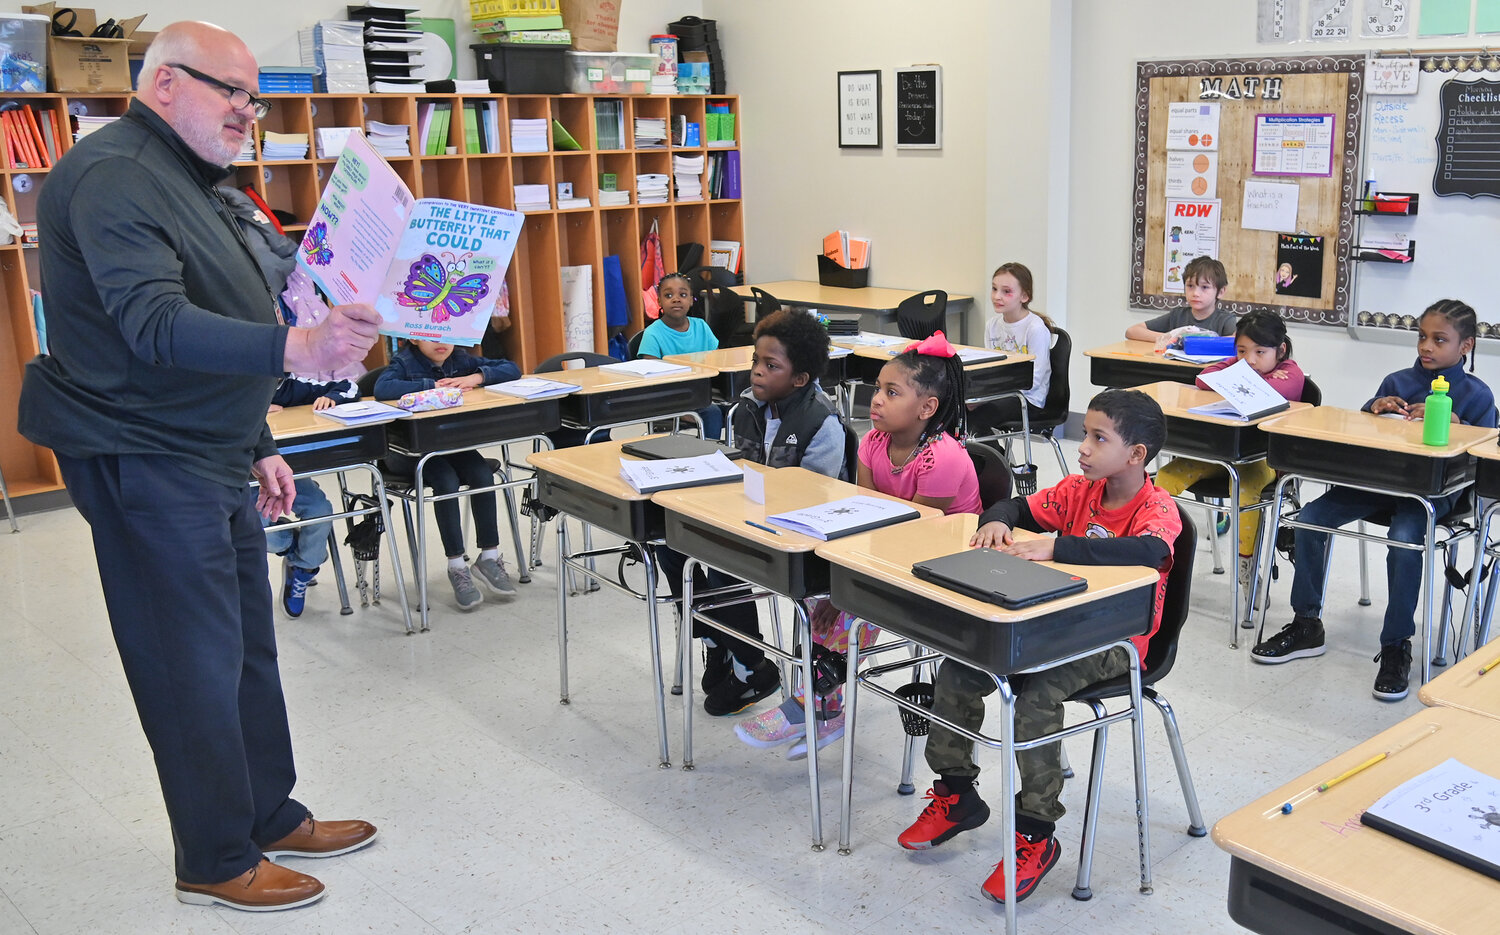 Acting superintendent Brian Nolan reads "The Little Butterfly that Could" to Doris Testa's third grade class Friday, March 24 during the Community Reader's Day event at Kernan Elementary School in Utica.